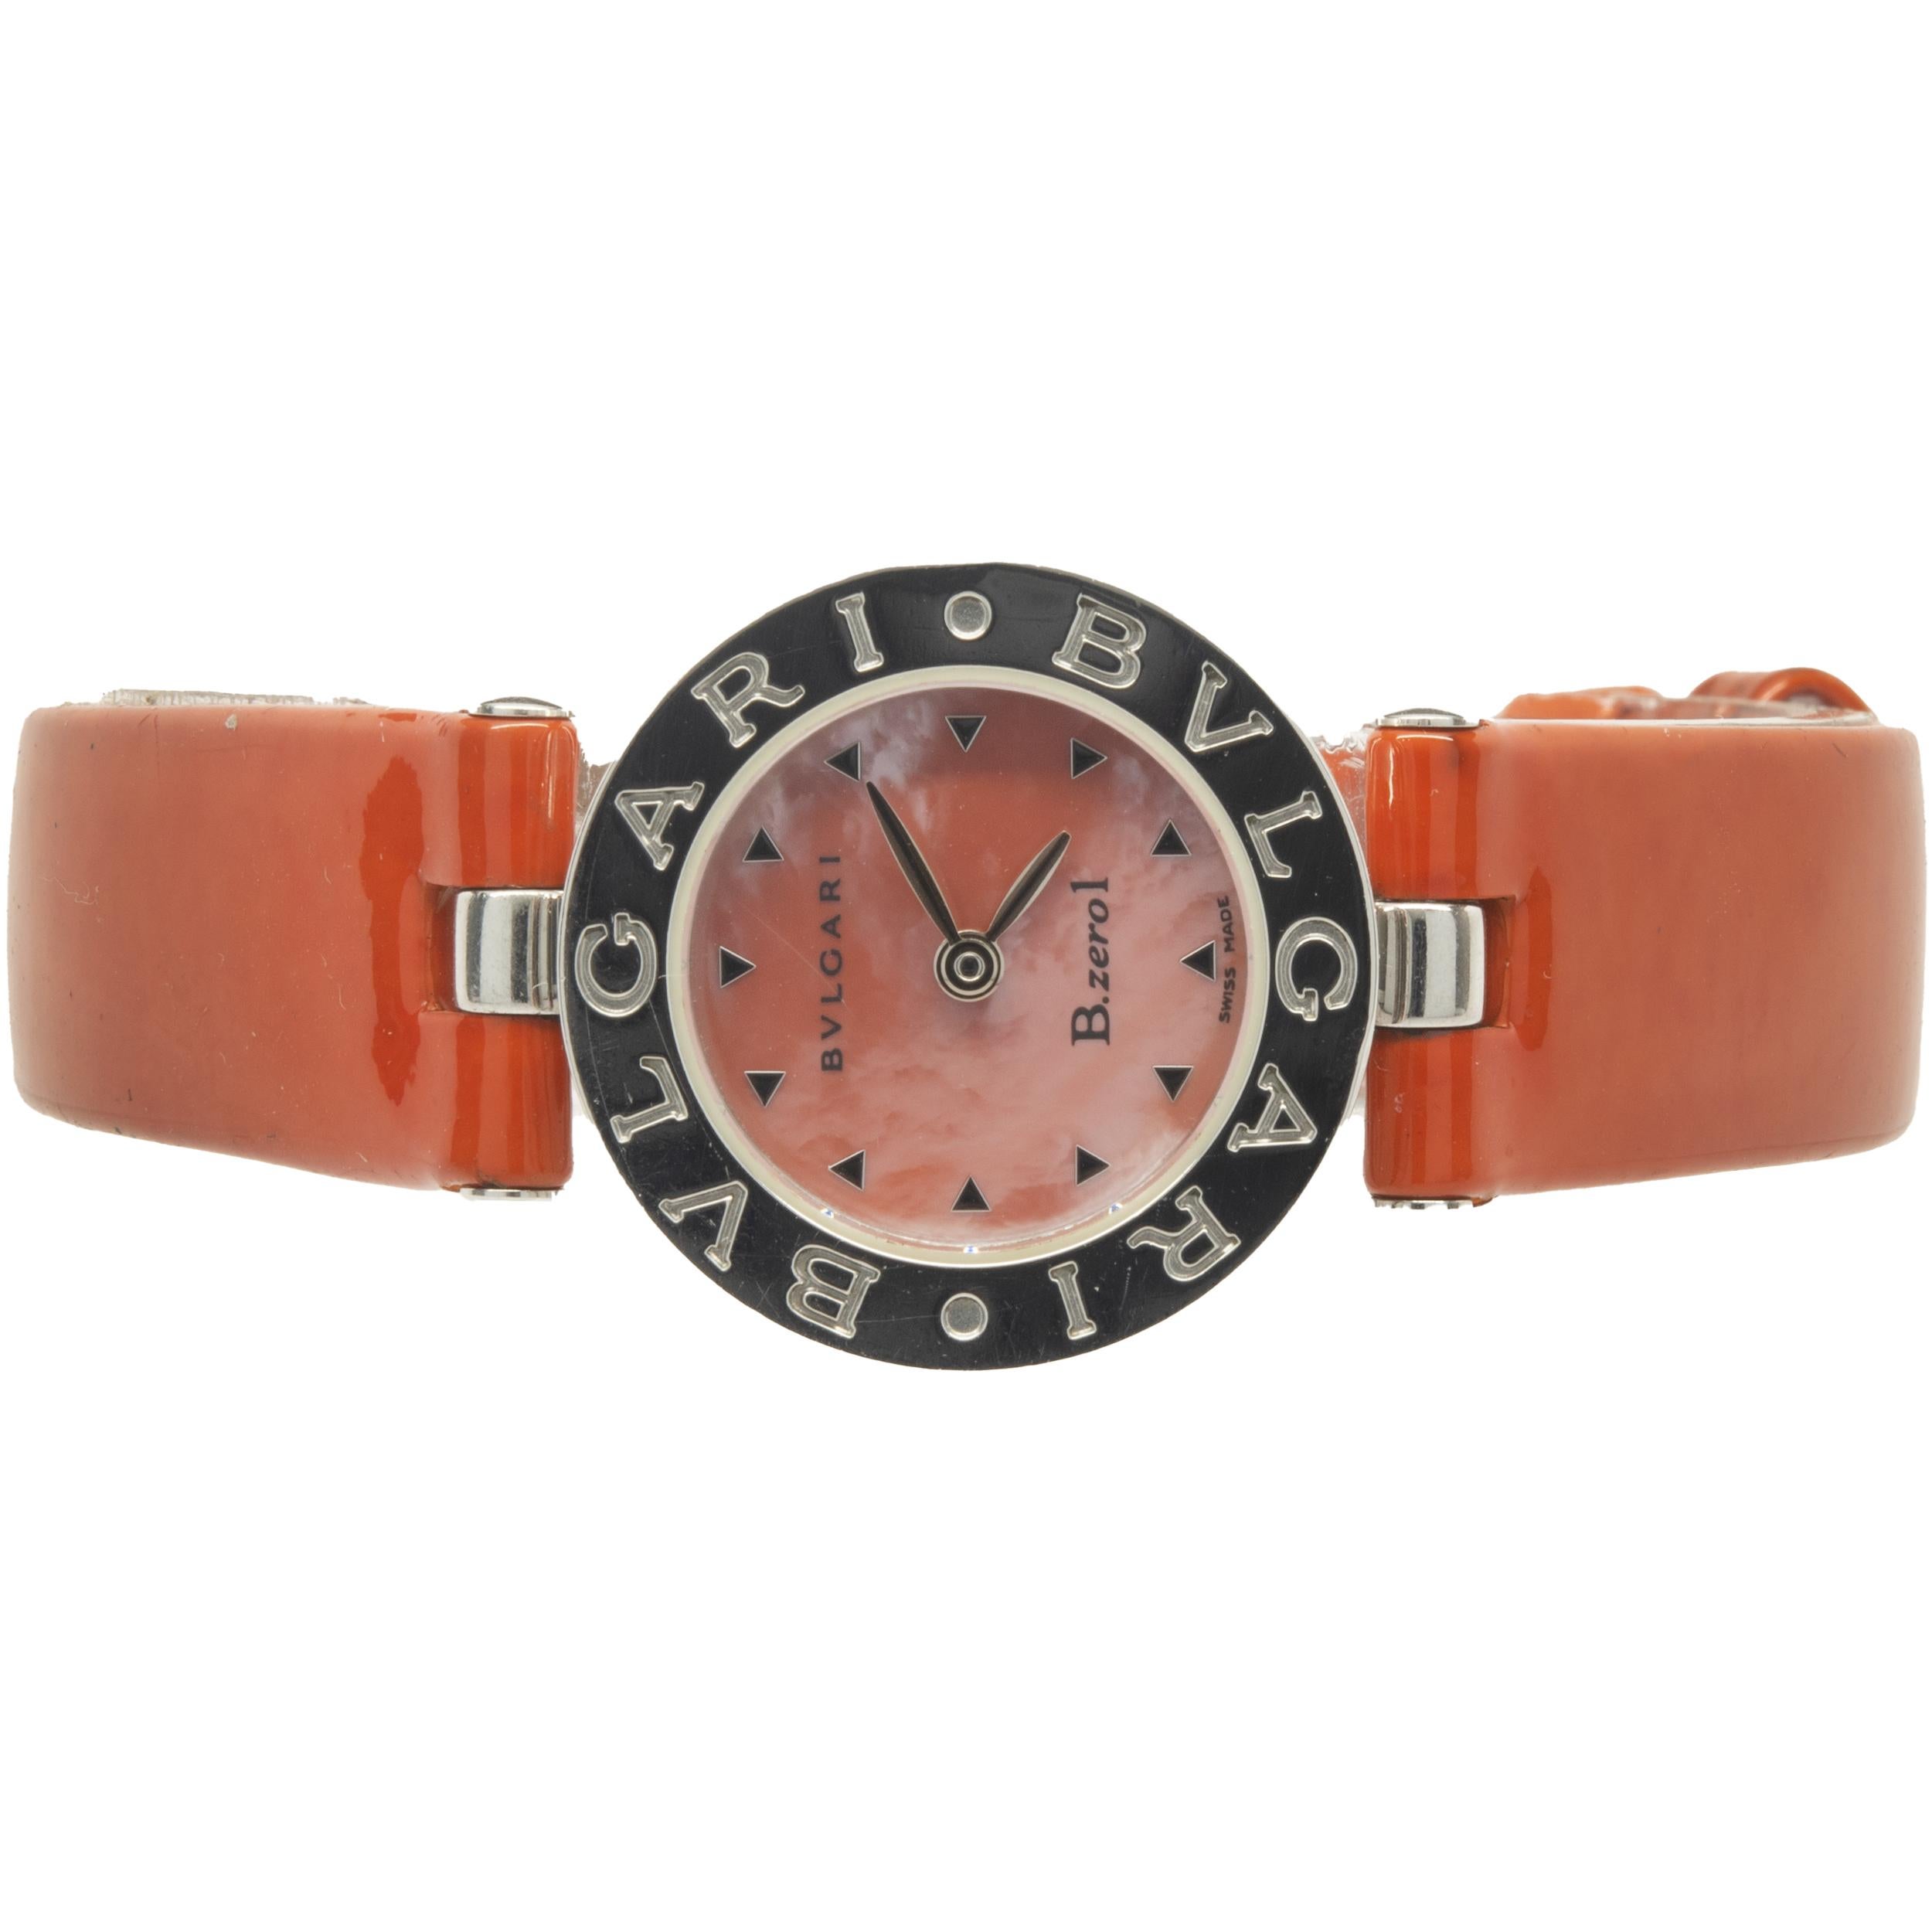 Movement: quartz
Function: hours, minutes
Case: 22mm round case, smooth Bulgari bezel, sapphire crystal
Band: Bulgari orange leather strap, integrated clasp
Dial: orange stick dial
Serial #: D83XXX
Reference #: BZ22s

No box or papers